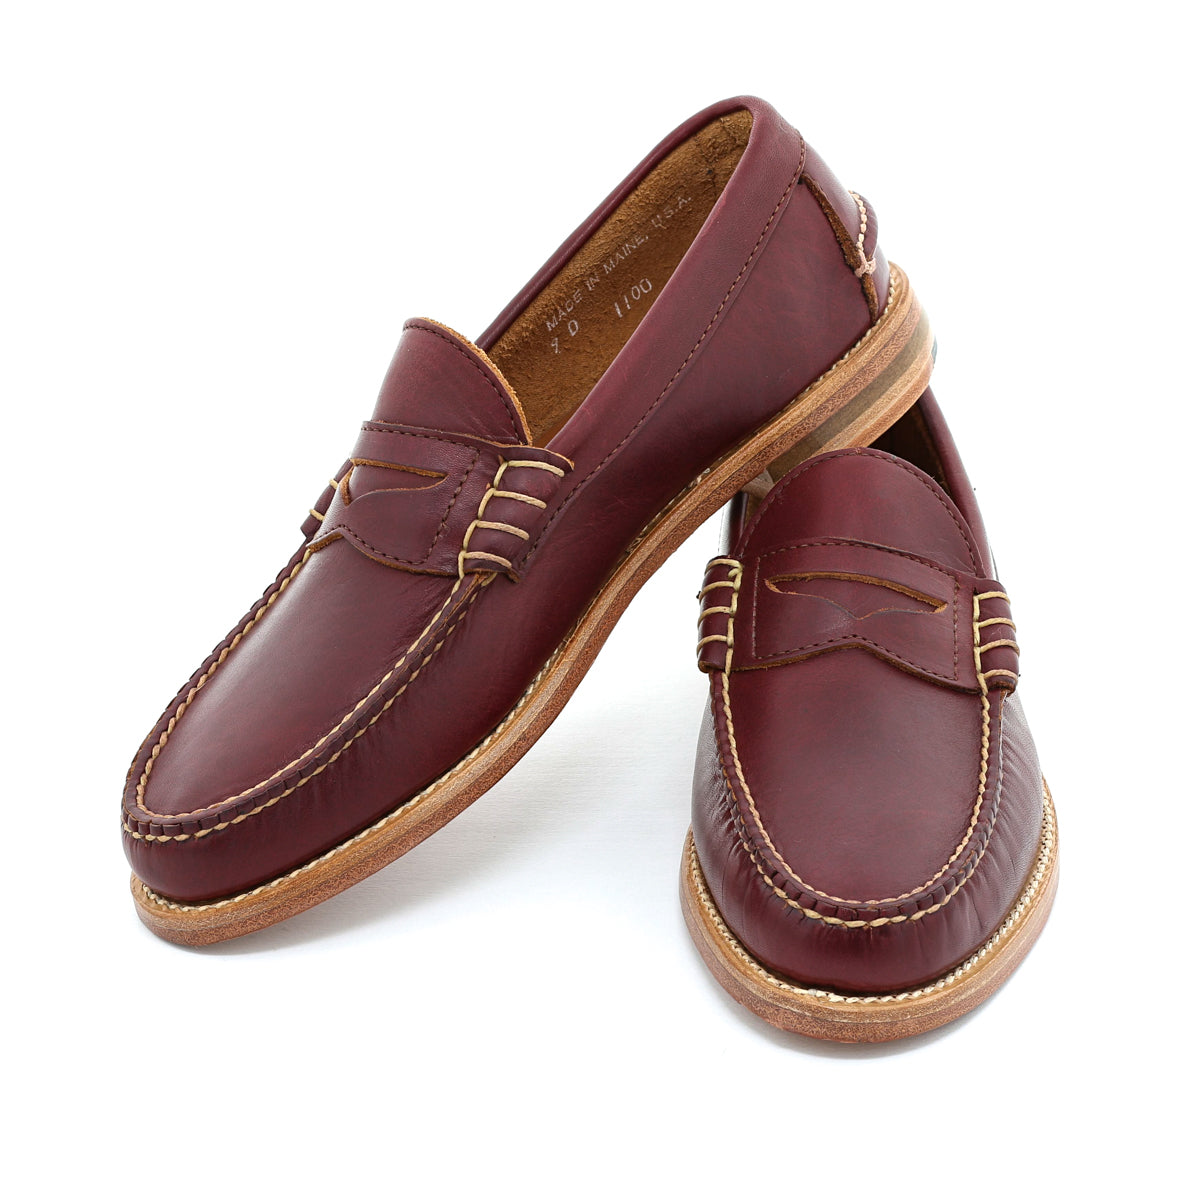 kam bh Plys dukke Beefroll Penny Loafers - Eggplant Honcho | Rancourt & Co. | Men's Boots and  Shoes